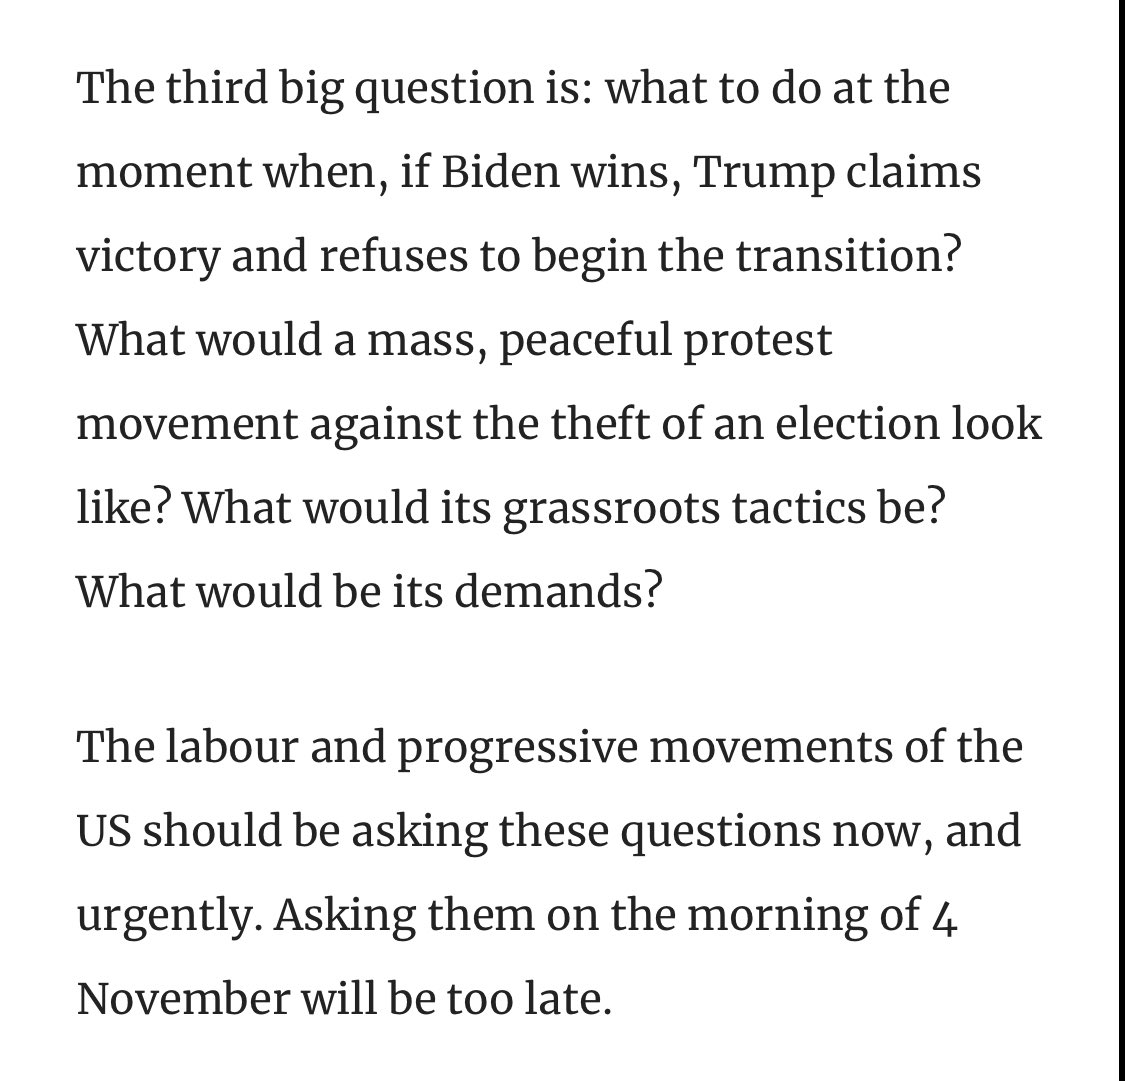 4/ I see no public leadership from the US progressive/ left right now - only protest. But protest has to be harnessed to a strategy - while the word "strategist" has come to mean the opposite of what's now needed...  https://www.newstatesman.com/world/north-america/2020/08/democrats-need-plan-stop-donald-trump-stealing-election